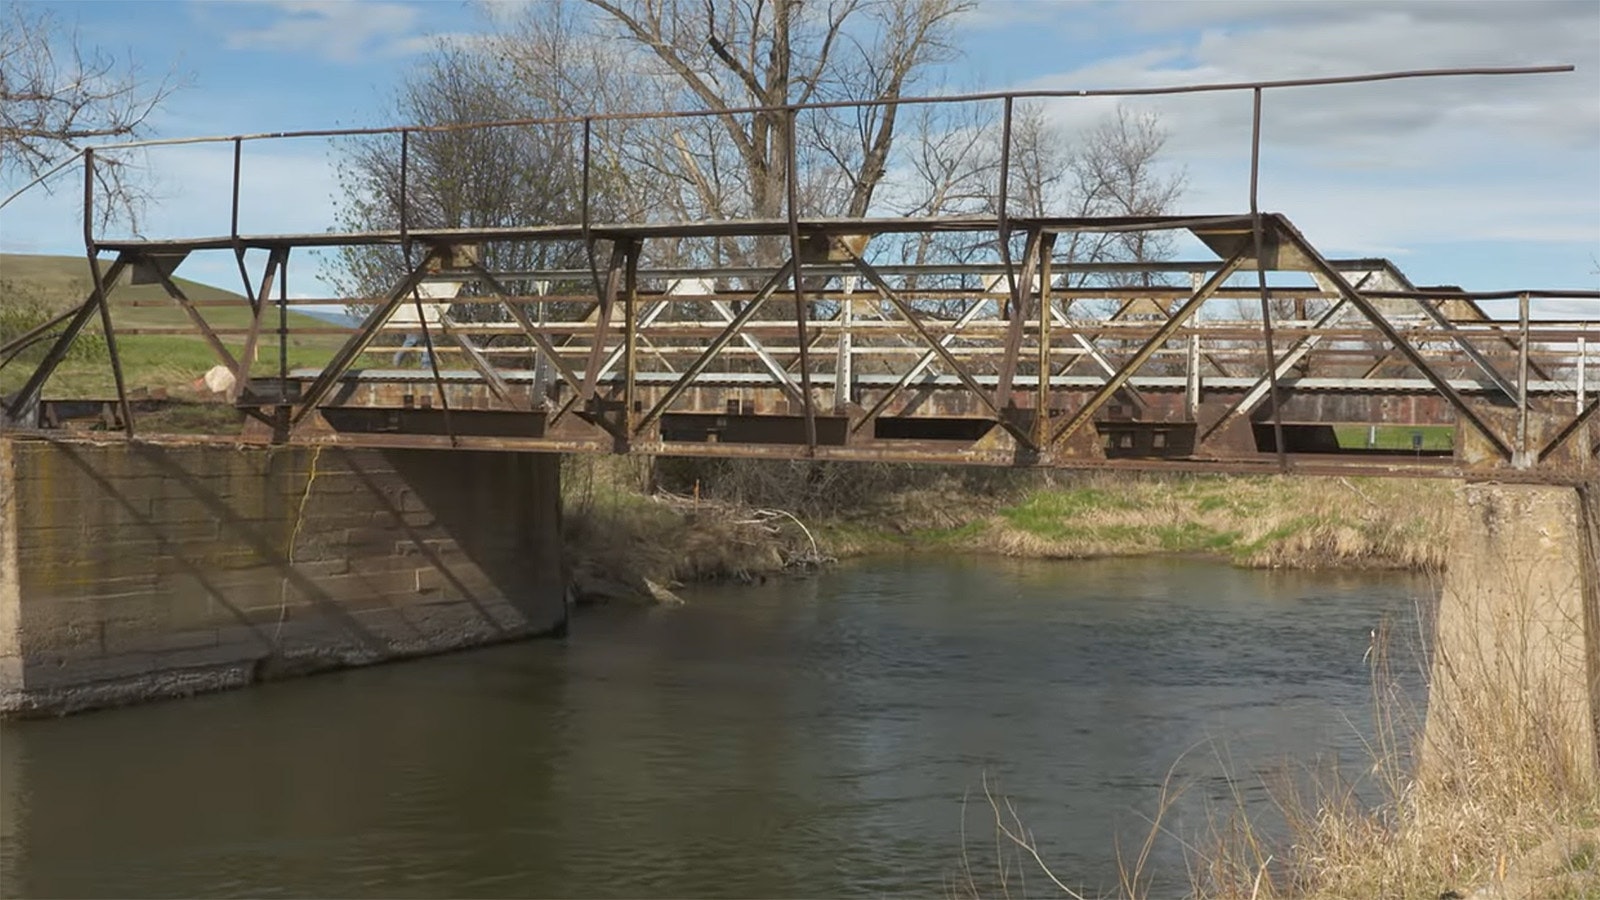 After 115 years, Wyoming's only remaining steel truss bridge, Monarch Bridge near Sheridan, has officially been retired.